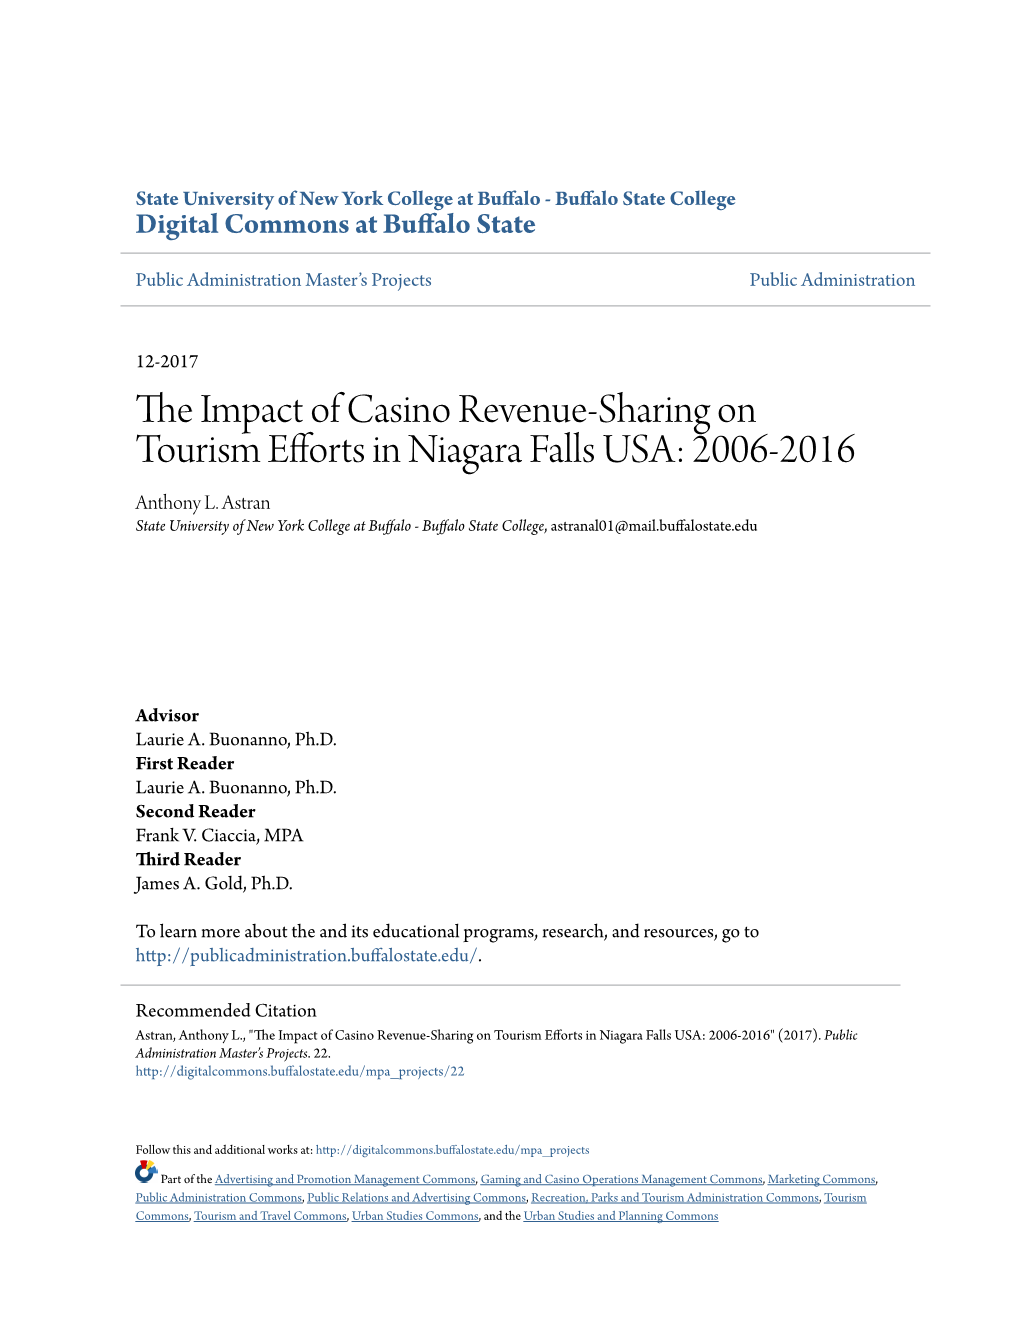 The Impact of Casino Revenue-Sharing on Tourism Efforts in Niagara Falls USA: 2006-2016